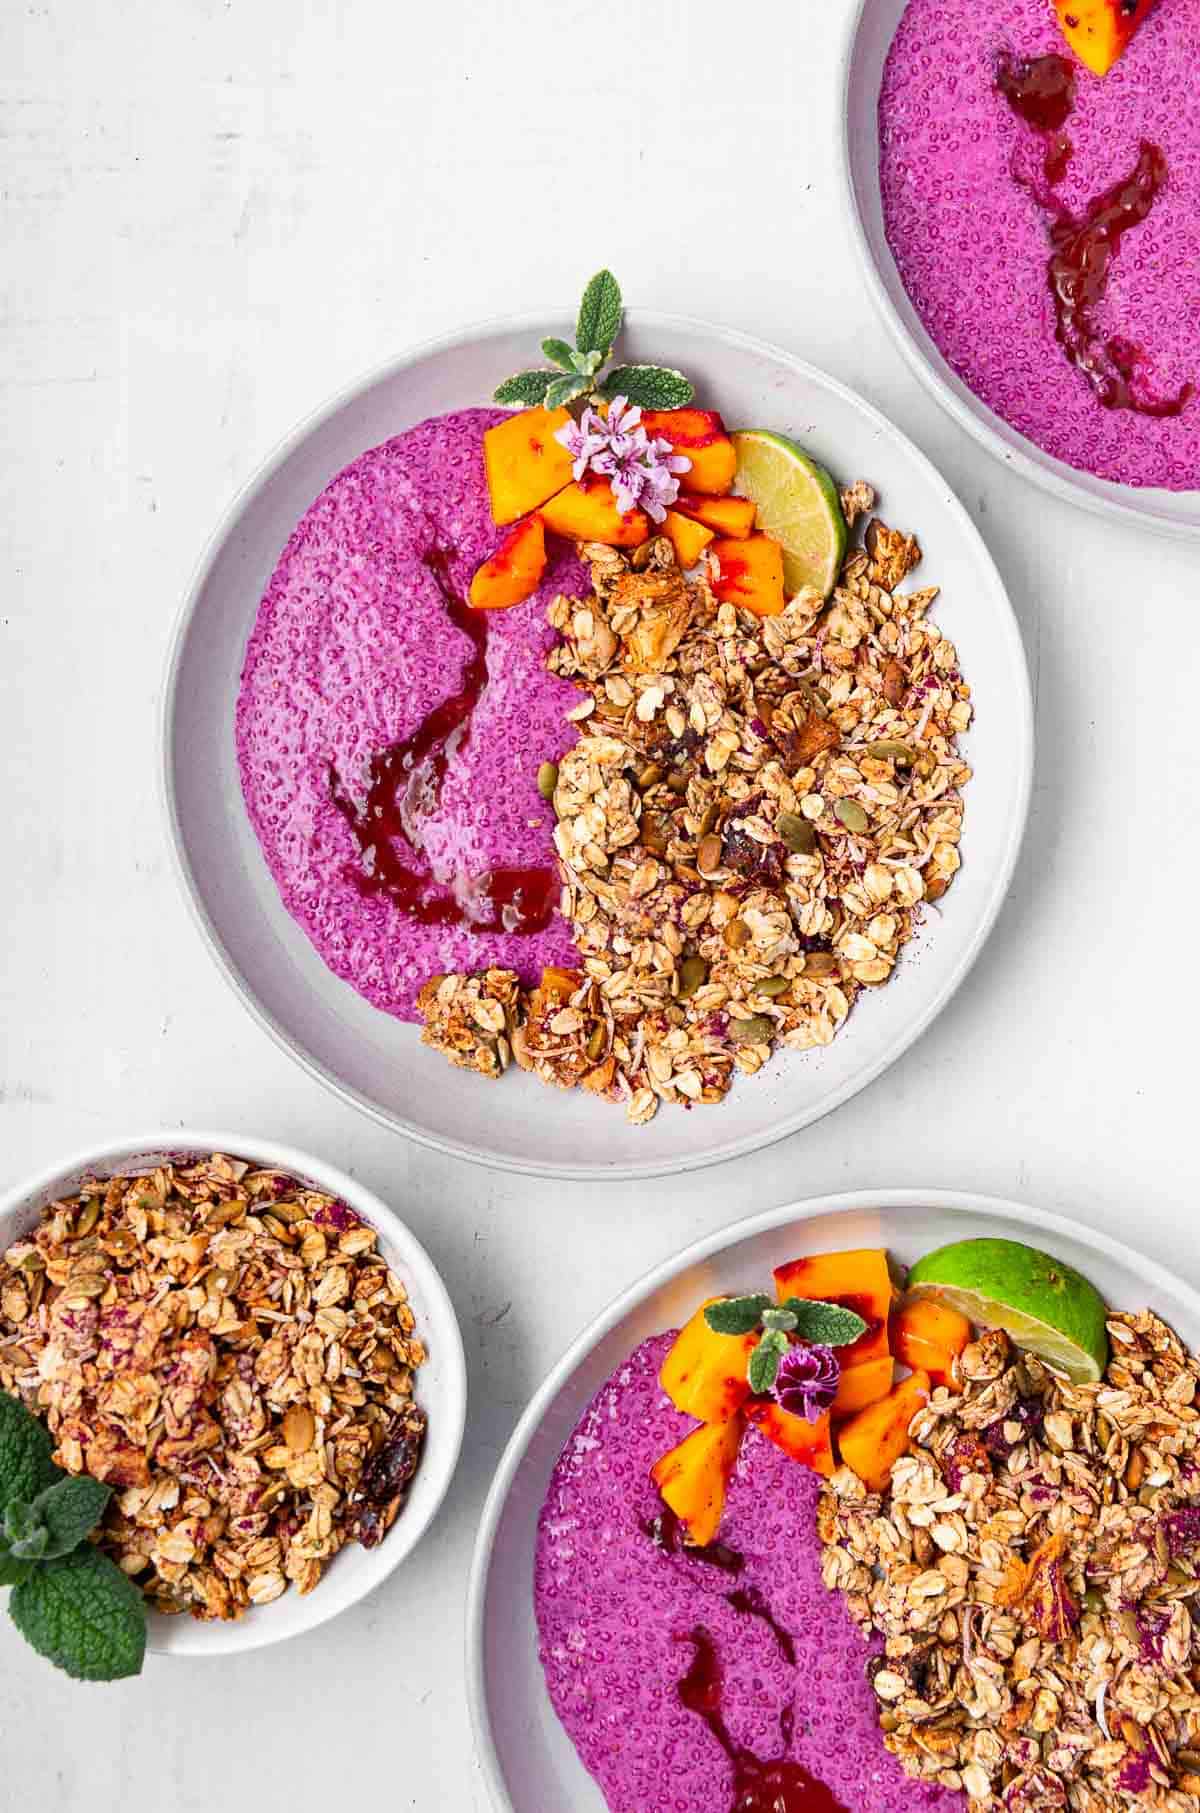 Tropical breakfast bowls filled with pink chia pudding and granola.